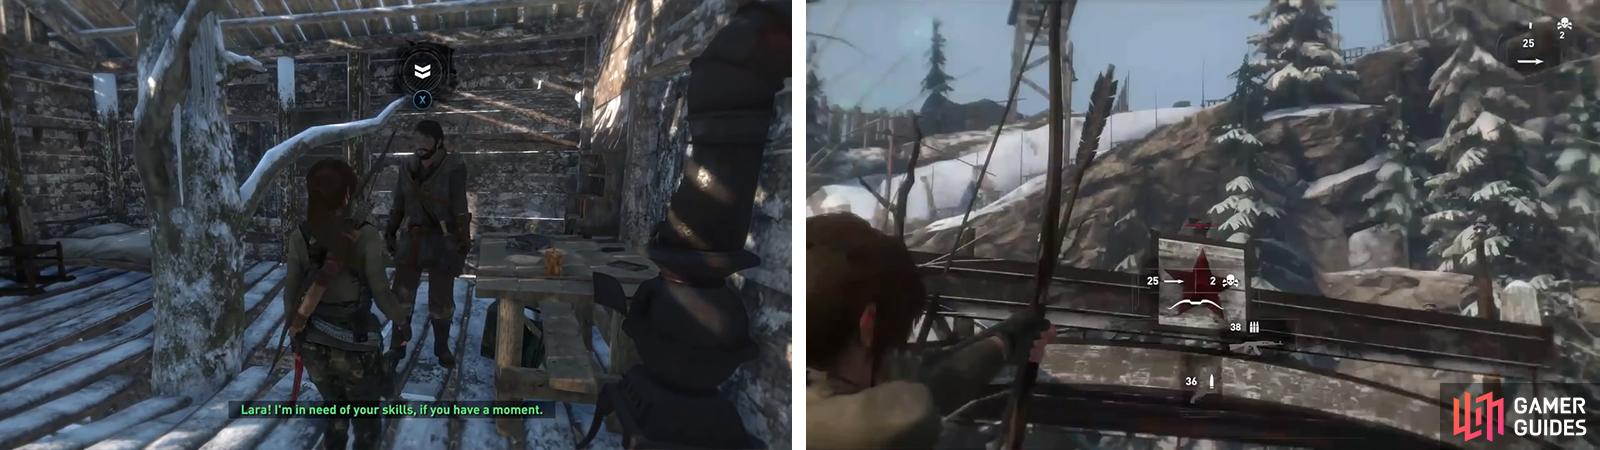 Accept the mission from the ‘Logging Camp’ Base Camp (left). You’ll find the target bird atop the gate here (right).